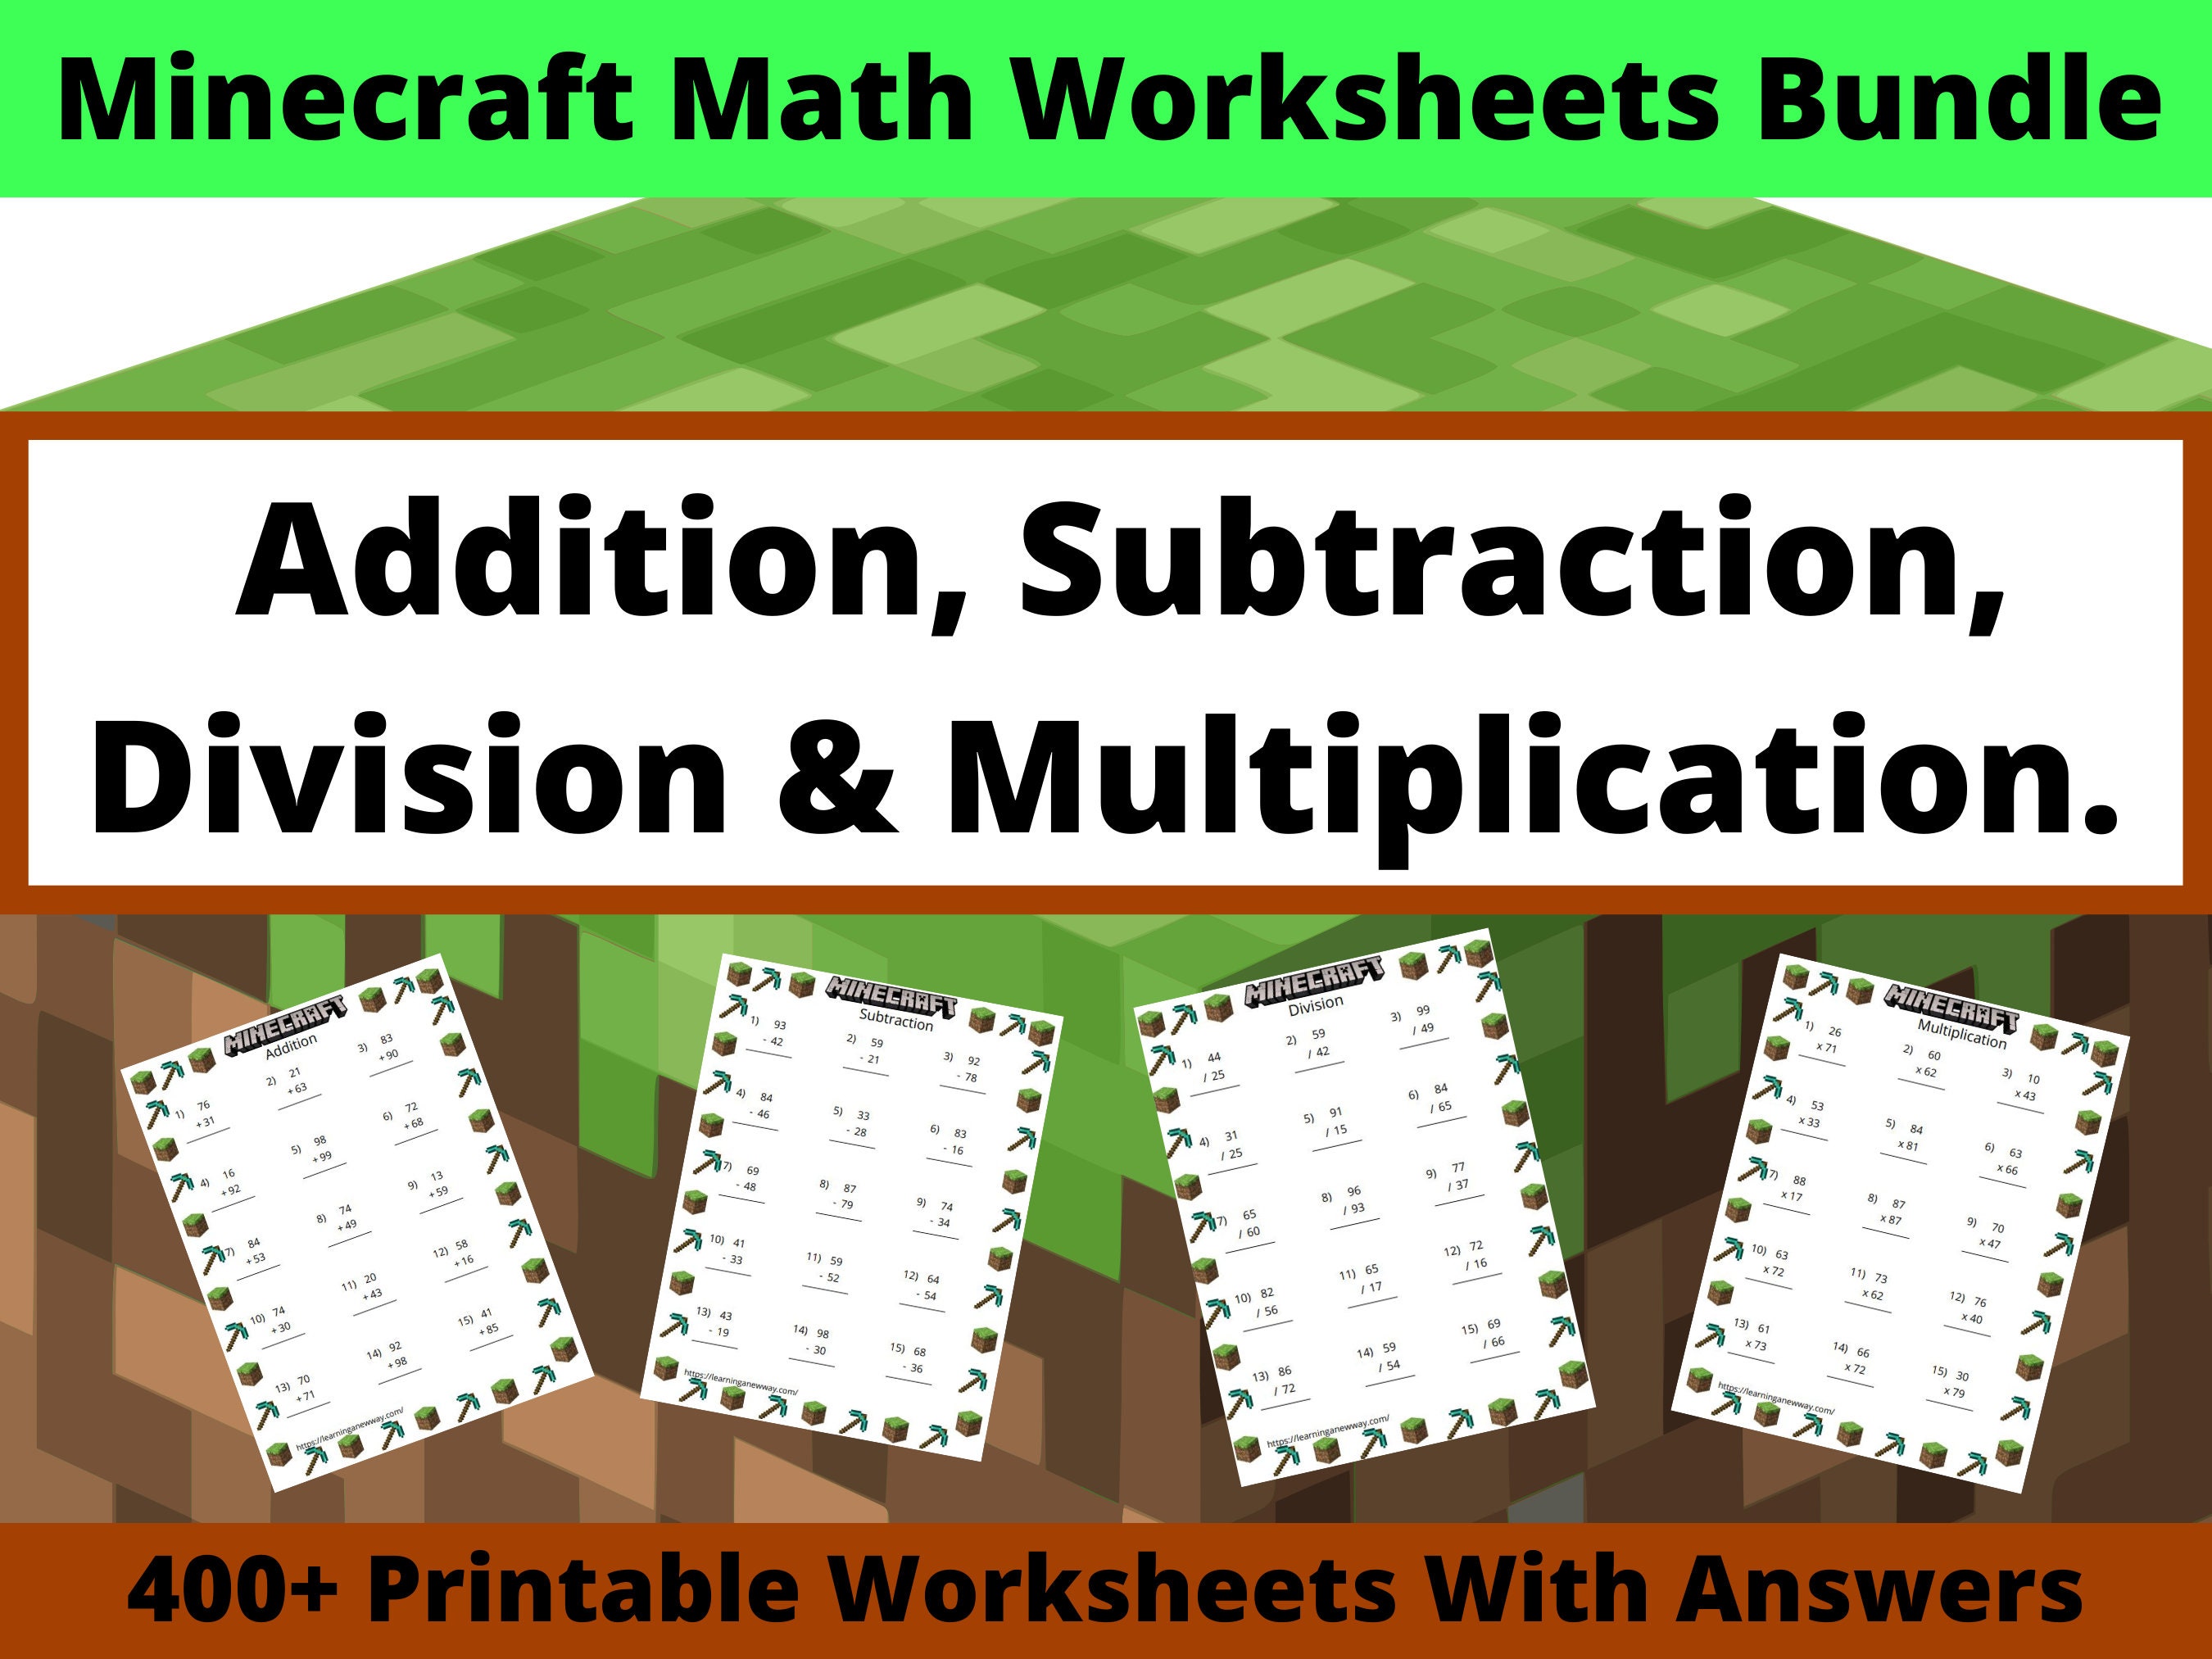 free-minecraft-printables-and-minecraft-worksheets